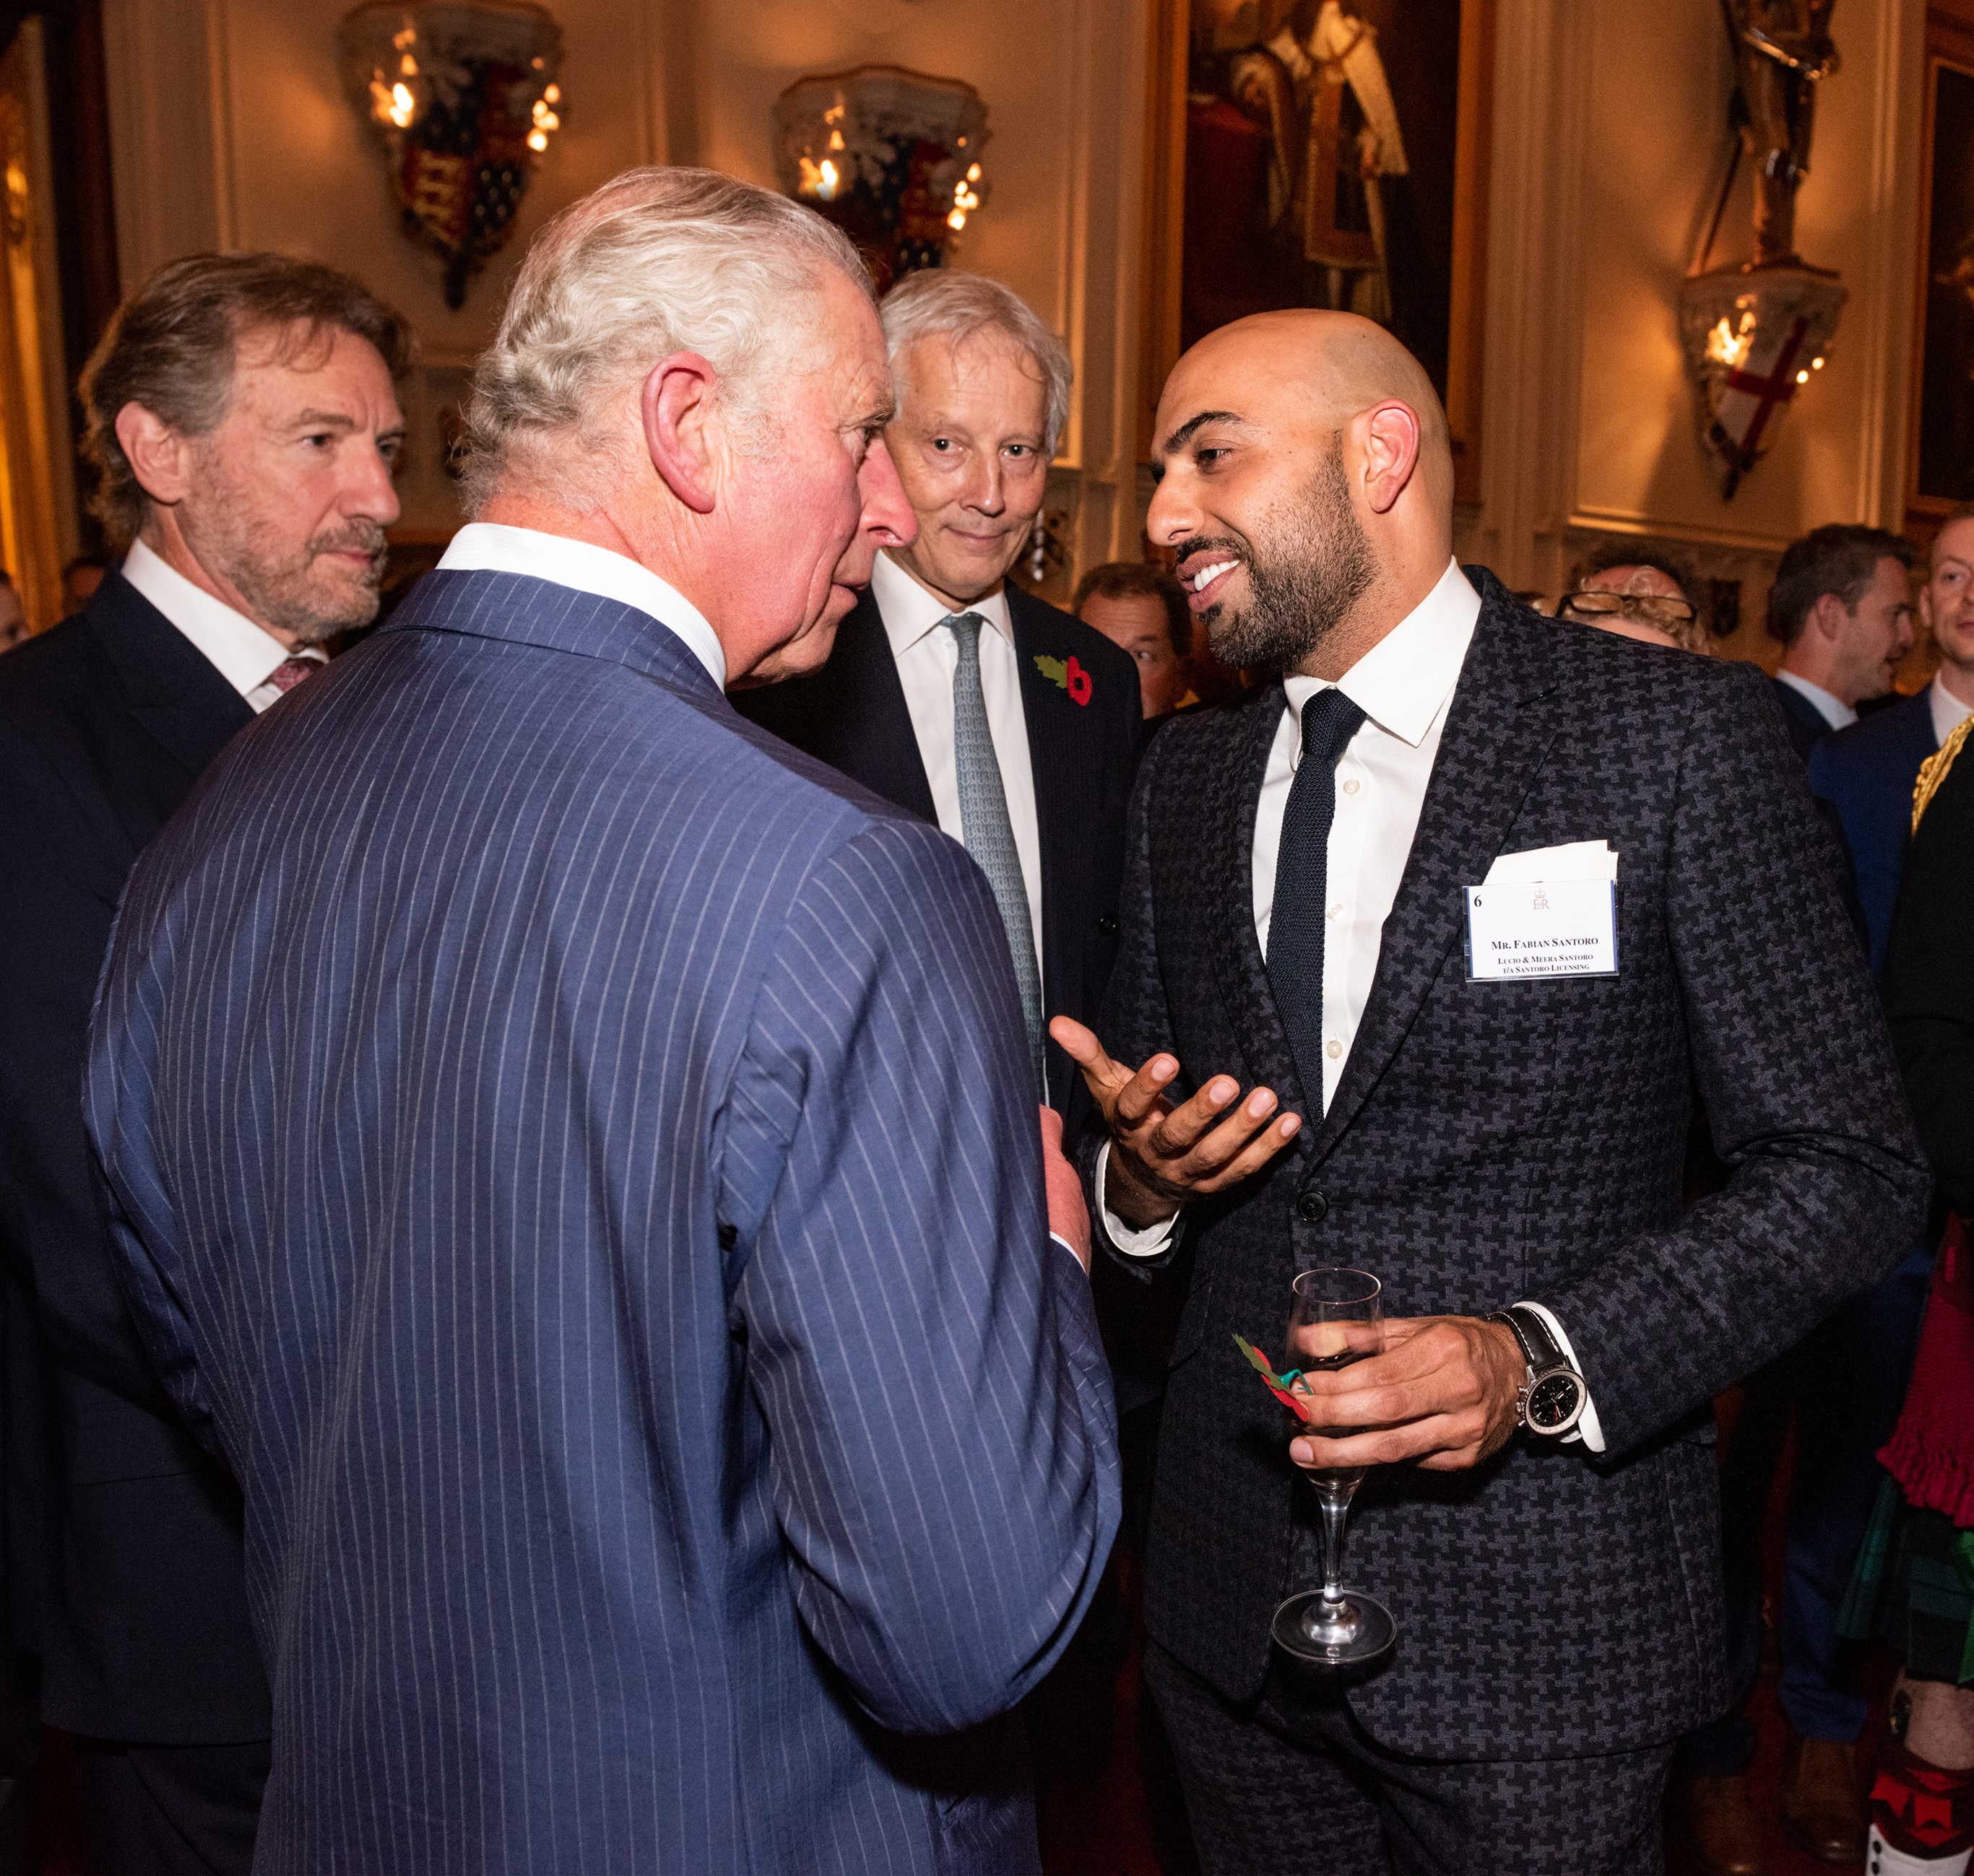 Above: Fabian Santoro (left) talking to Prince Charles at the event that was held in Windsor Castle a few days ago.